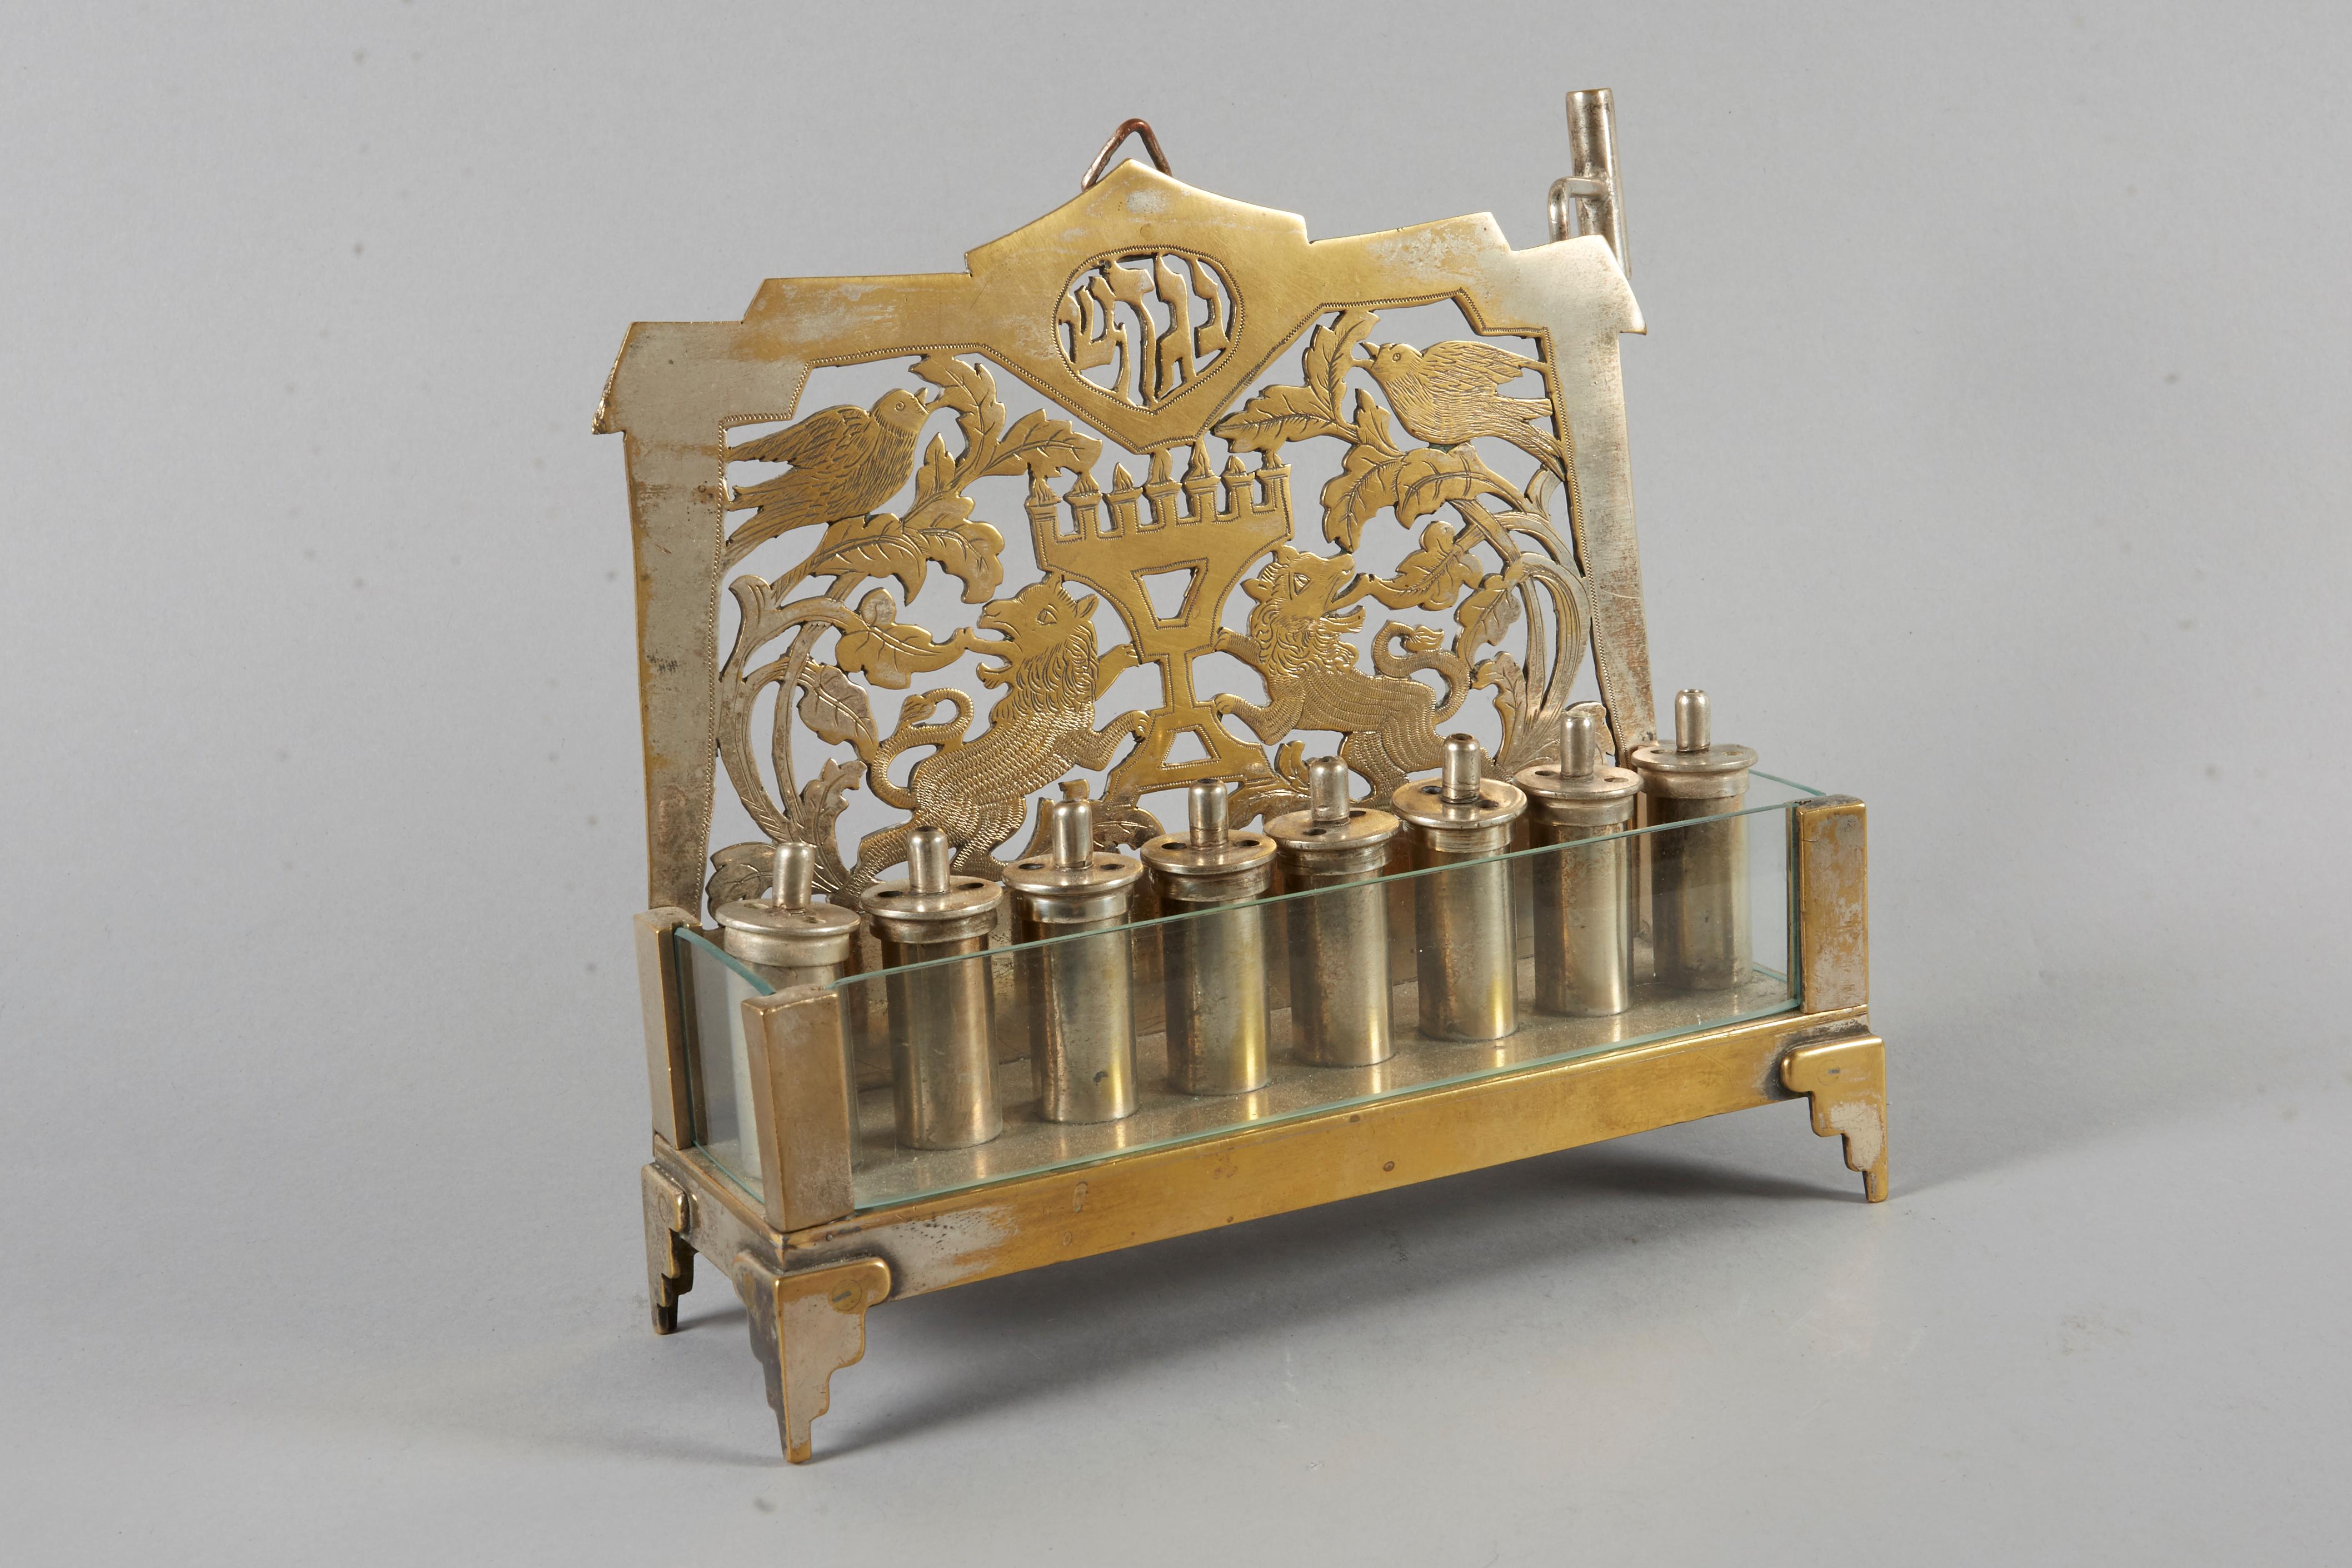 Unique and rare Hanukkah Lamp Menorah, brass and glass, Germany, circa 1900.
Hand cutout and engraved backplate with two lion flaking at the Temple Menorah surrounded with floral decoration and birds. Topped with Hebrew letters for: Great Miracle